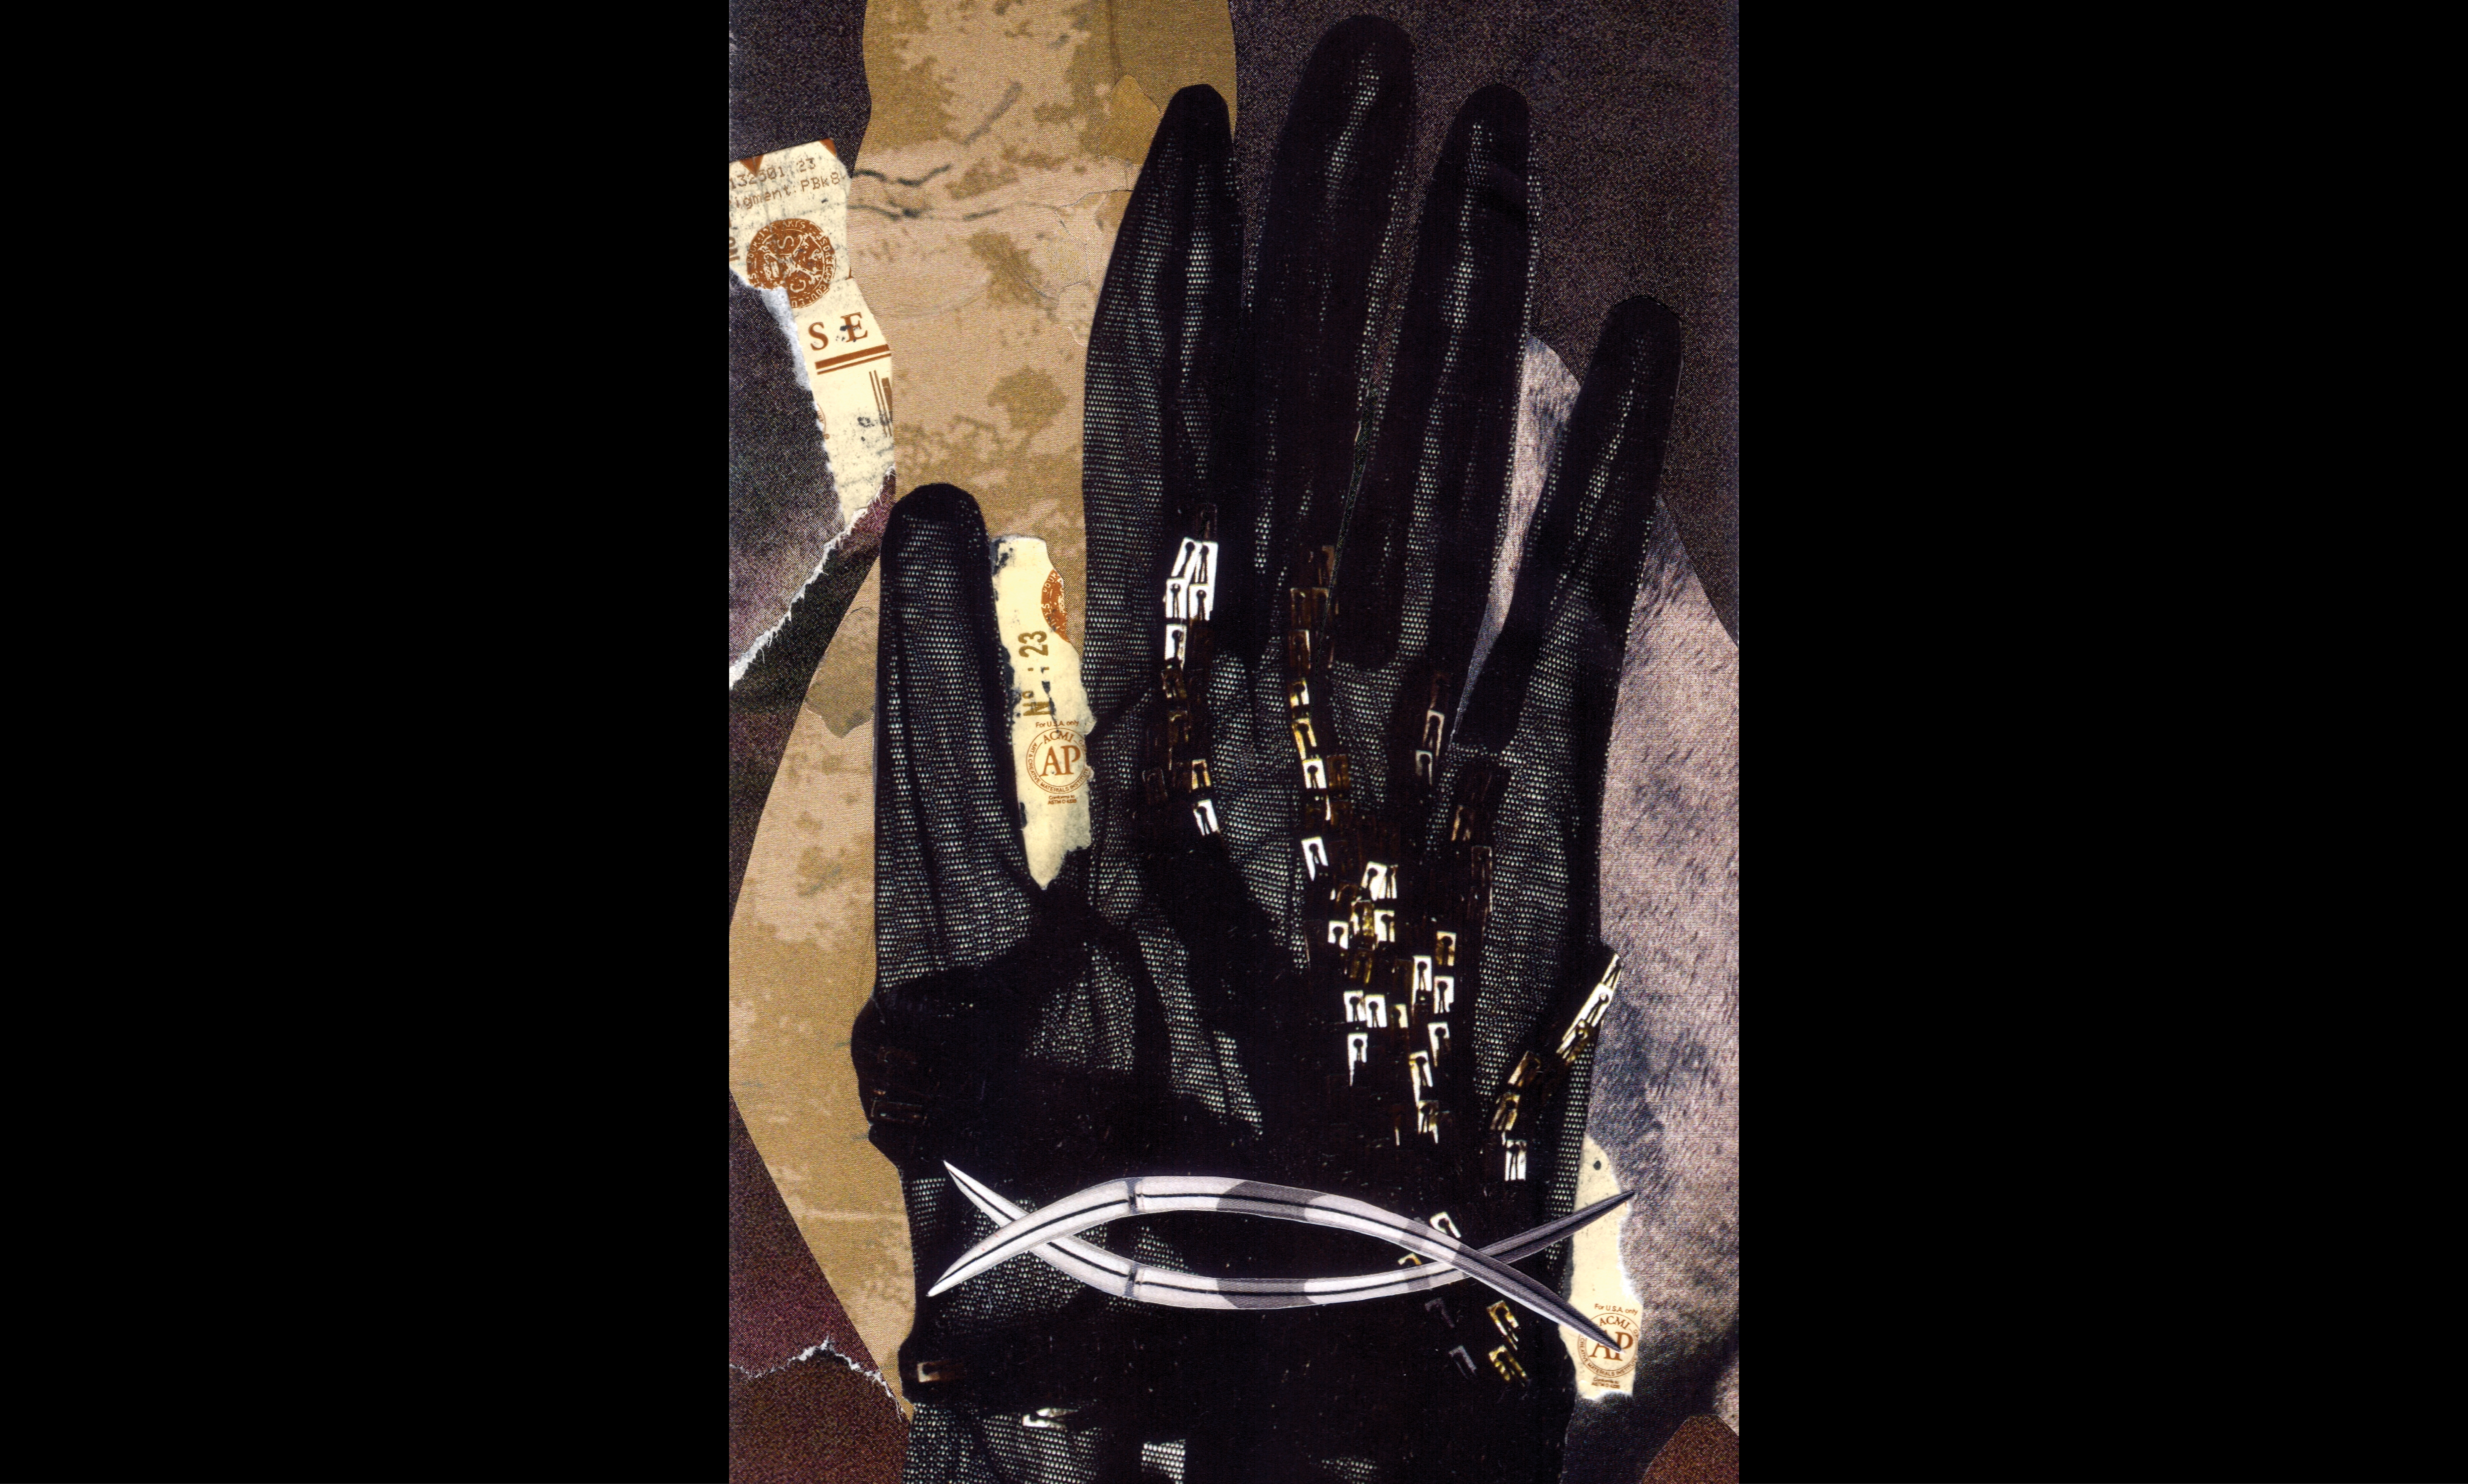 Abstract art featuring a black glove and surgical items.